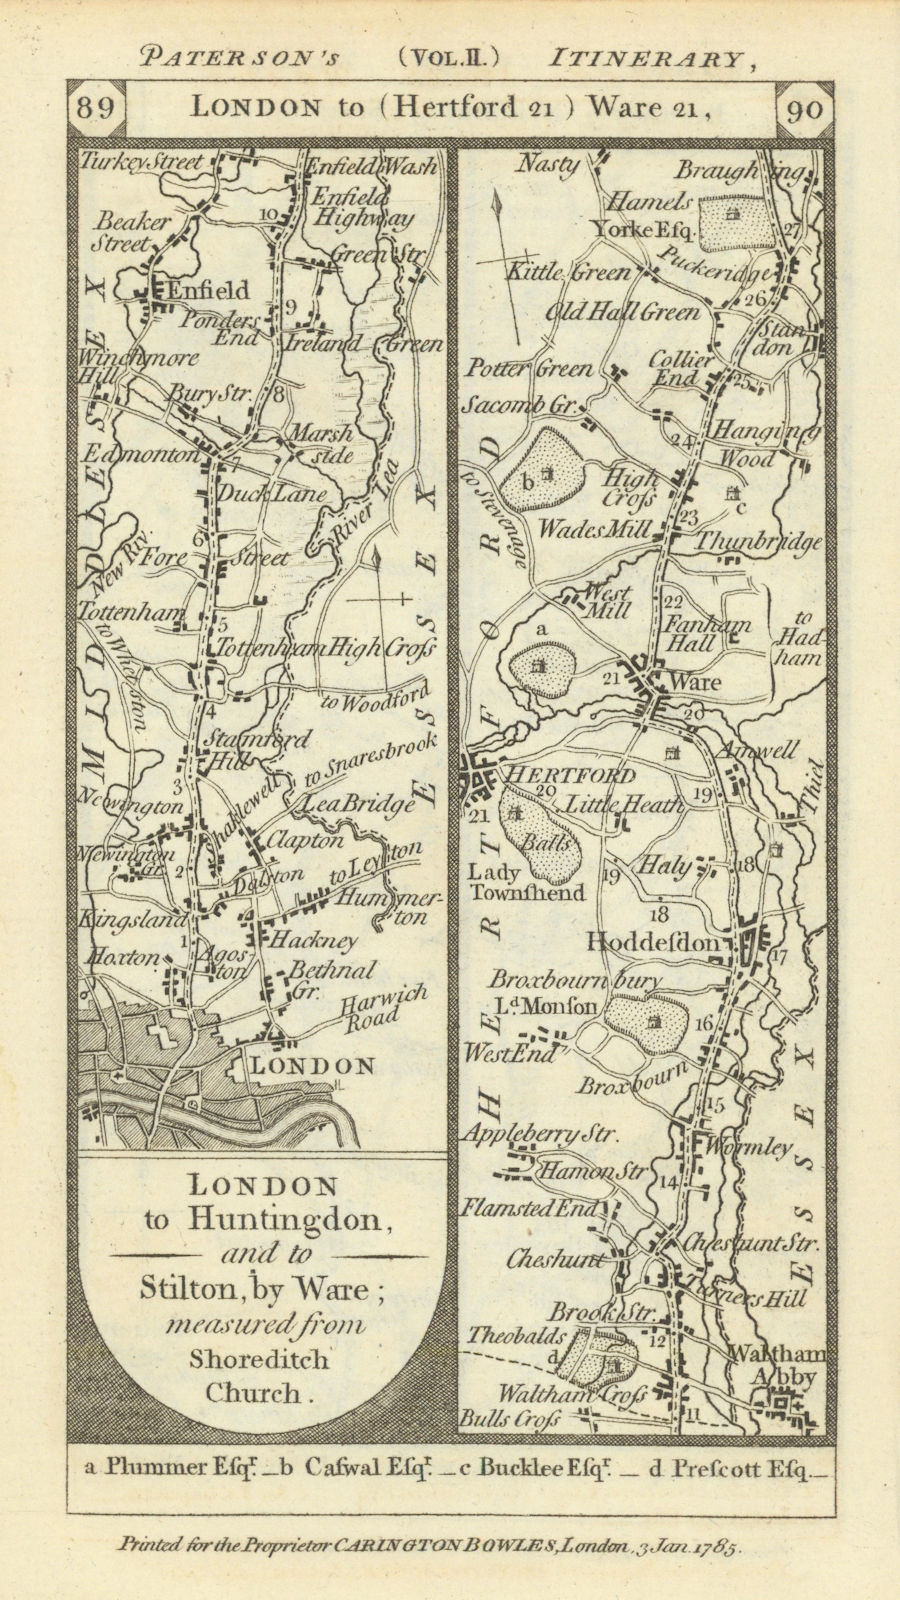 London-Enfield-Cheshunt-Hertford-Colliers End road strip map PATERSON 1785